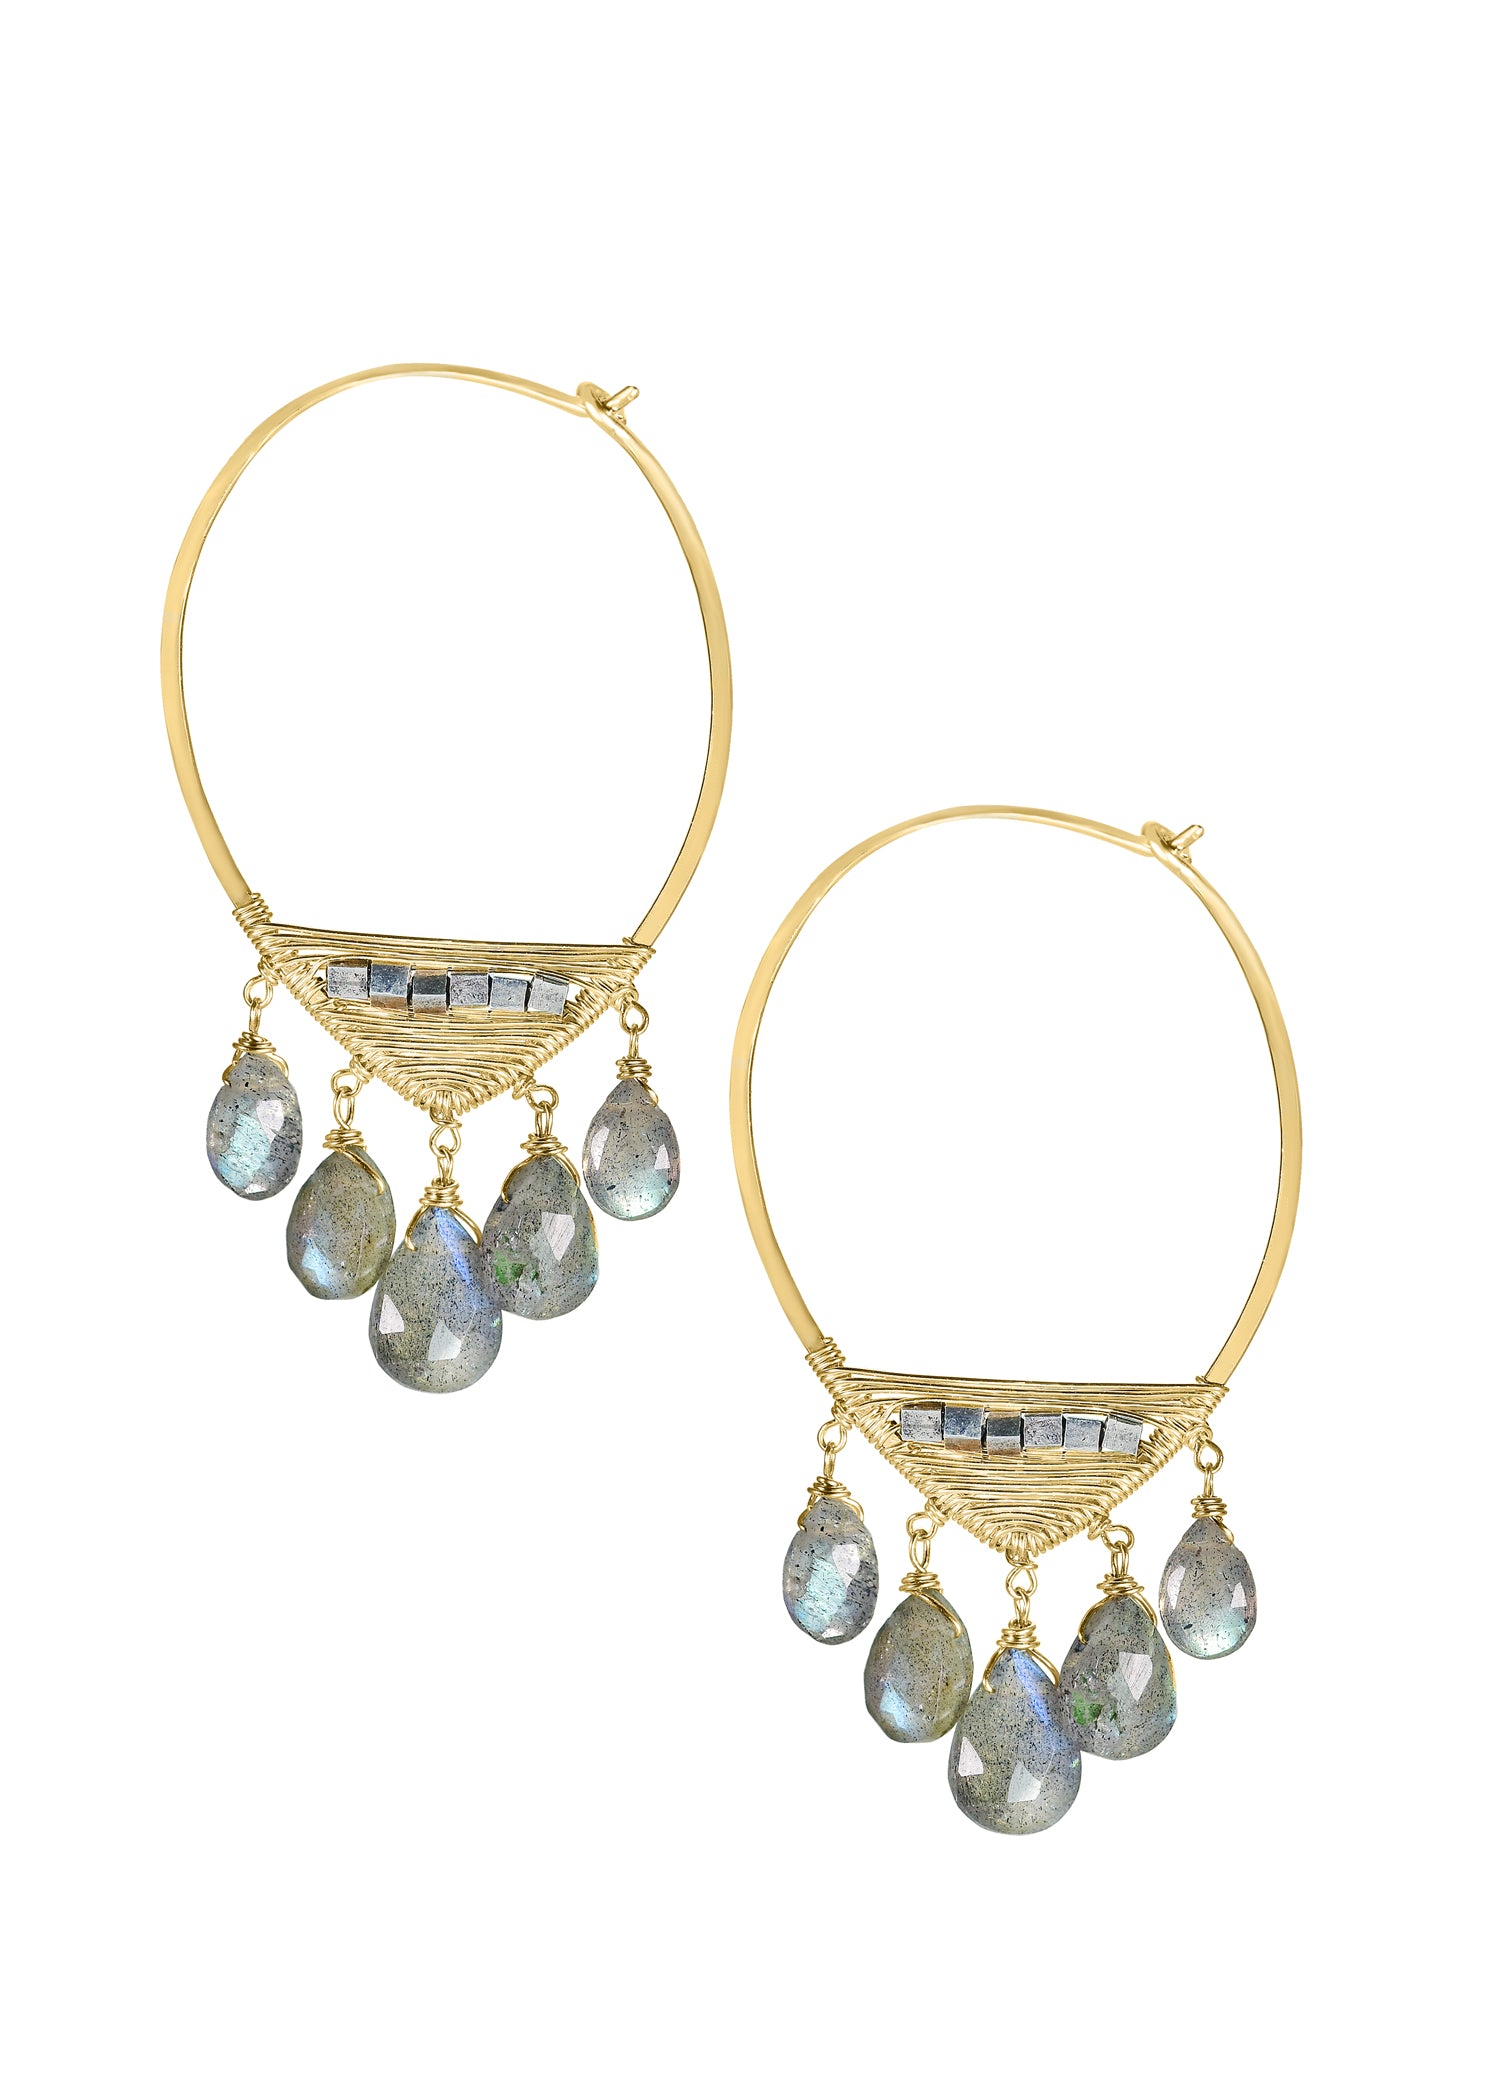 Labradorite 14k gold fill Sterling silver Mixed metal Earrings measure 1-13/16" in length and 1" in width at the widest point Handmade in our Los Angeles studio